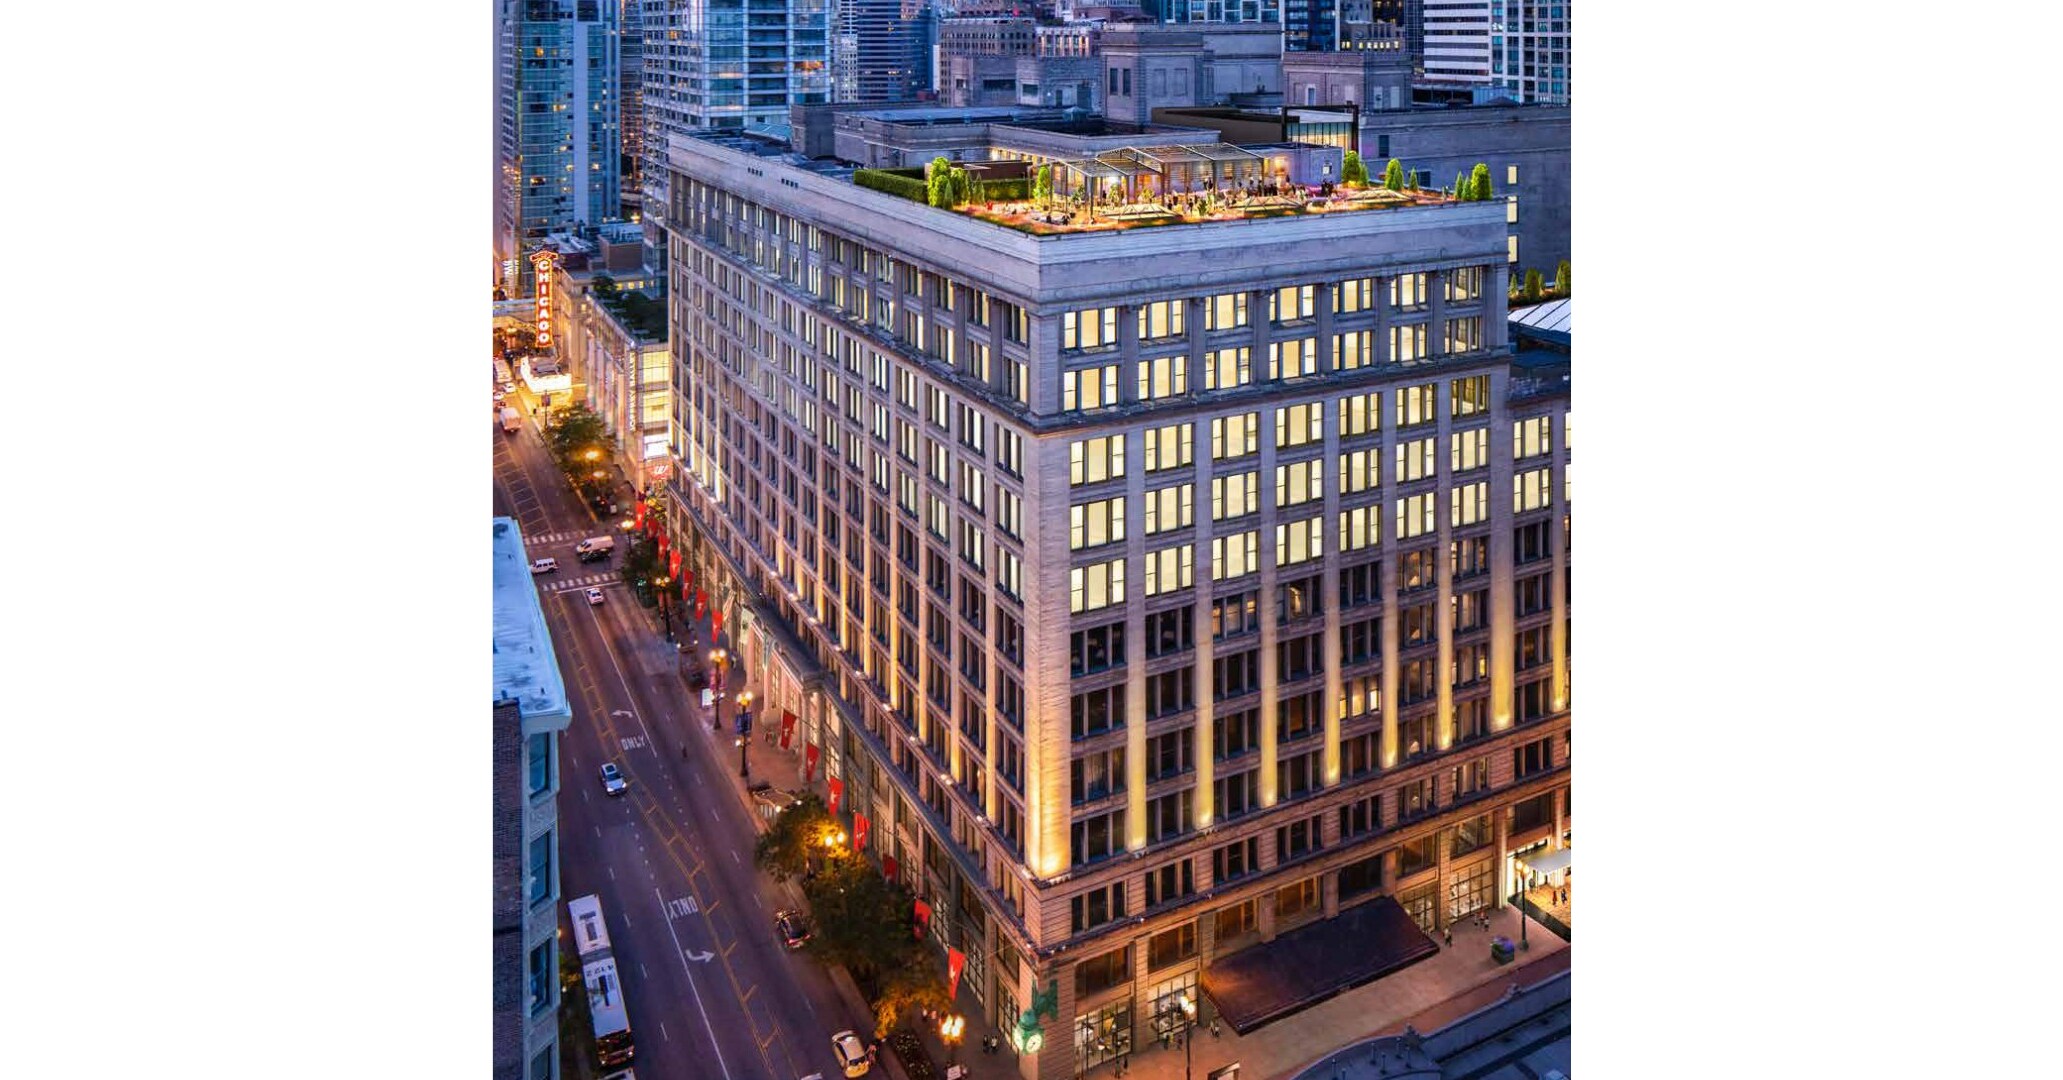 Leading Logistics Company Opens 31,000 Square Feet Office at Landmark Marshall Field & Company Building in Chicago